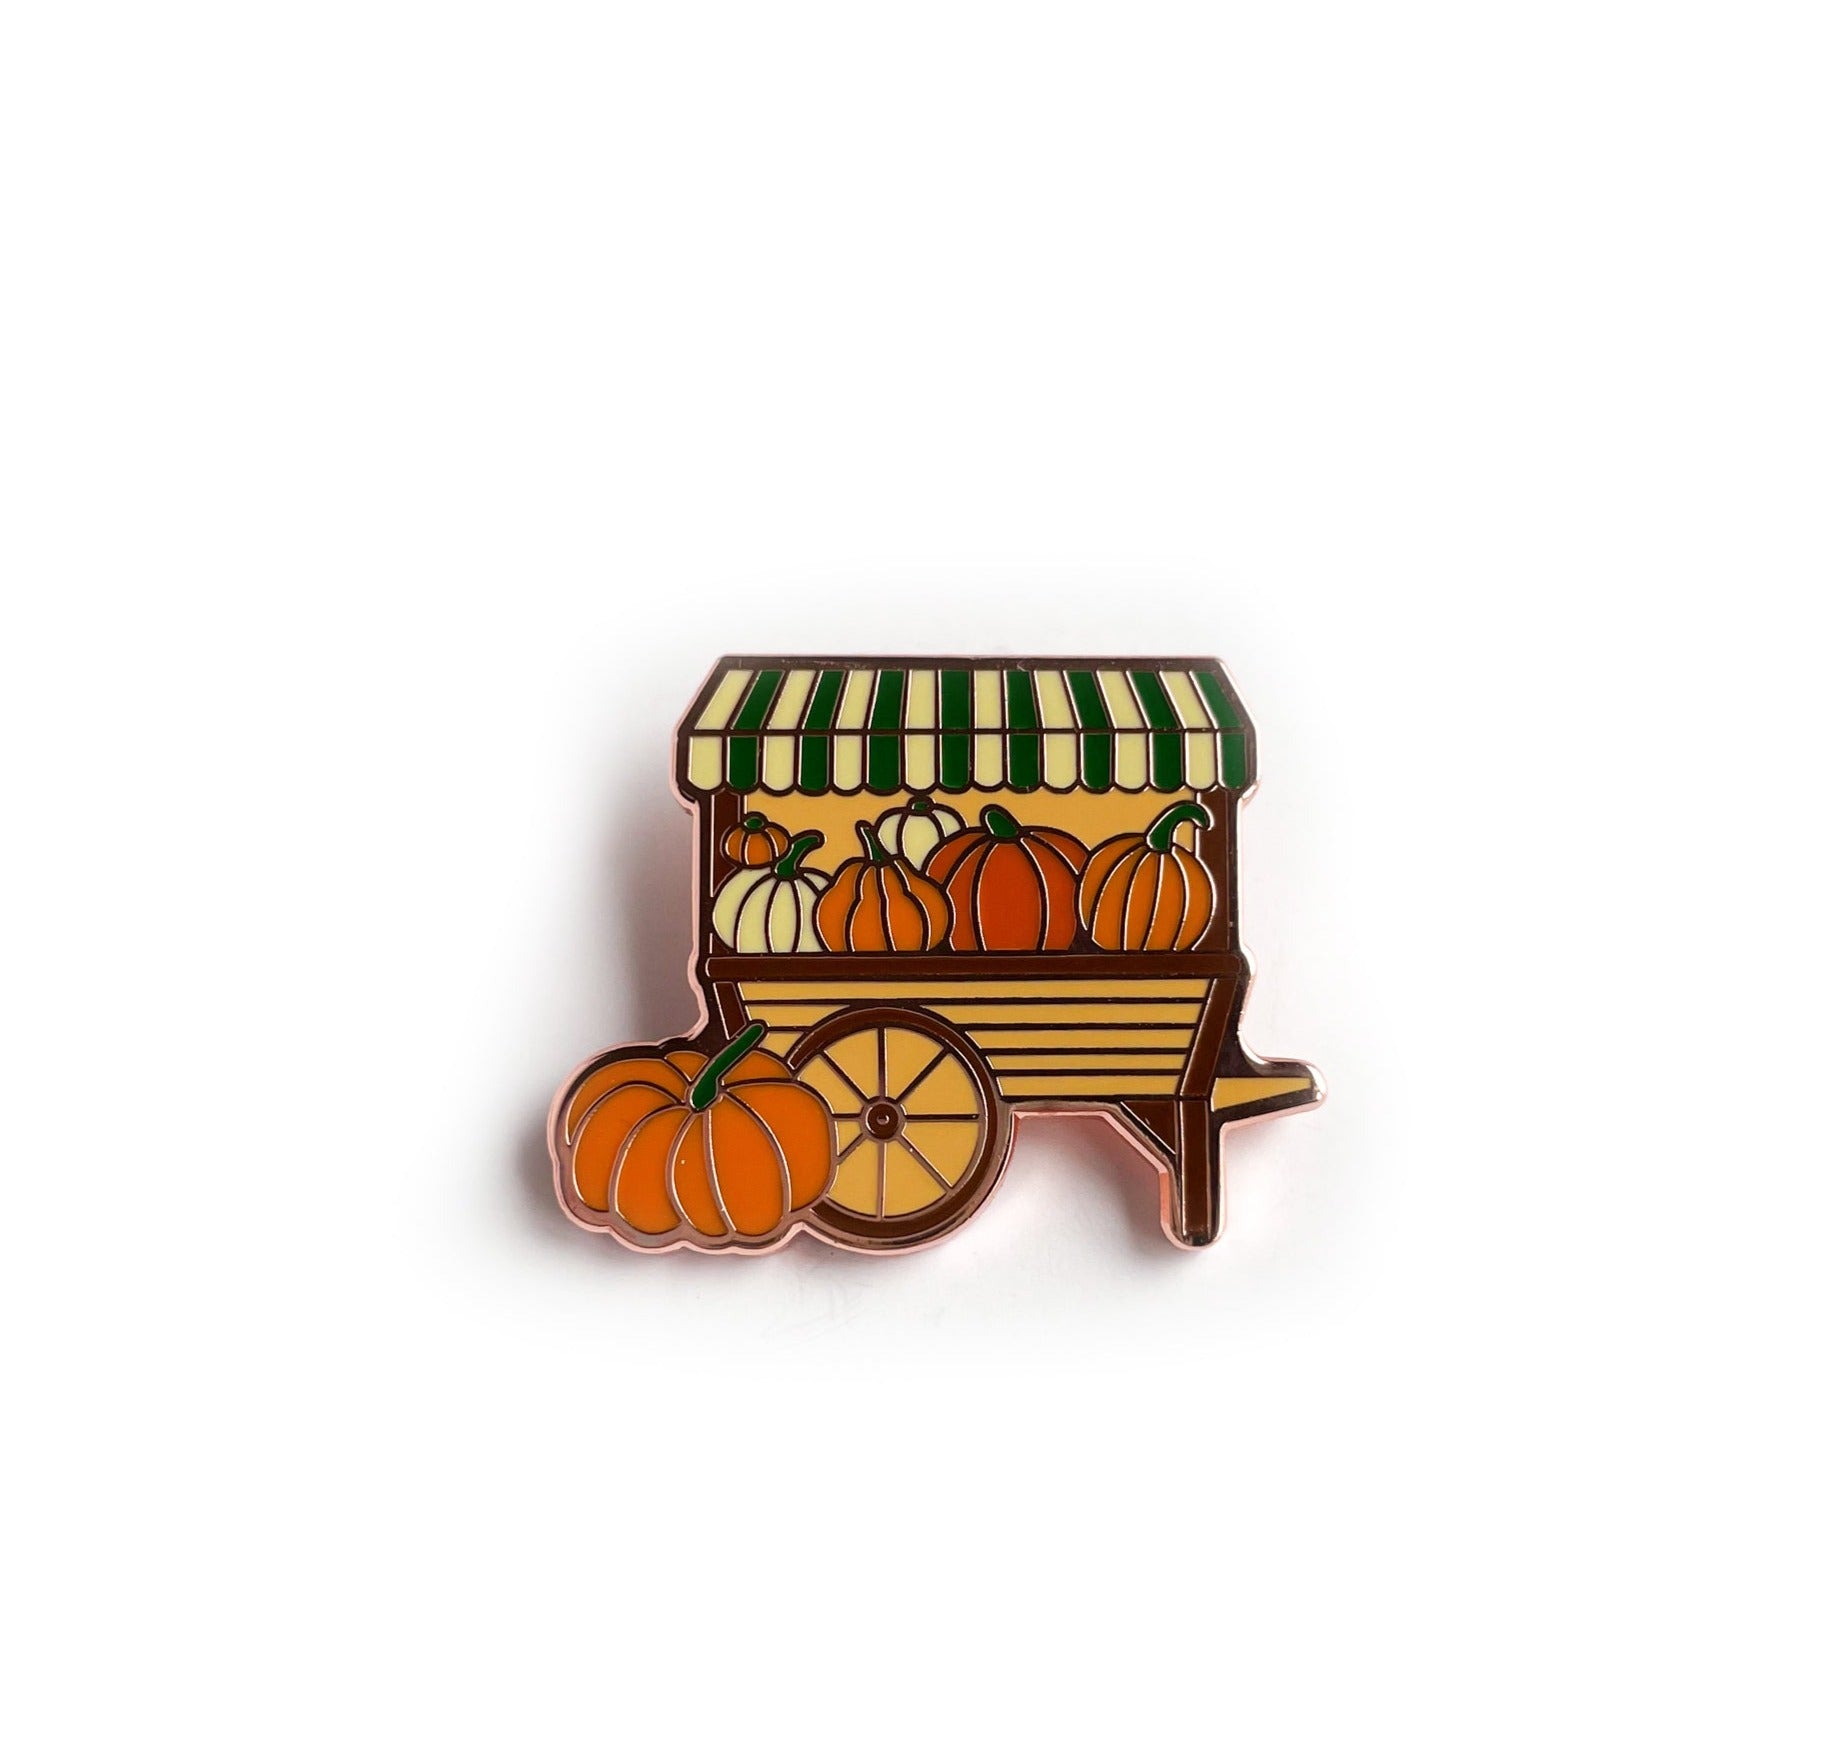 An enamel pin shaped like a pumpkin cart with a green striped roof and full of different colored pumpkins.